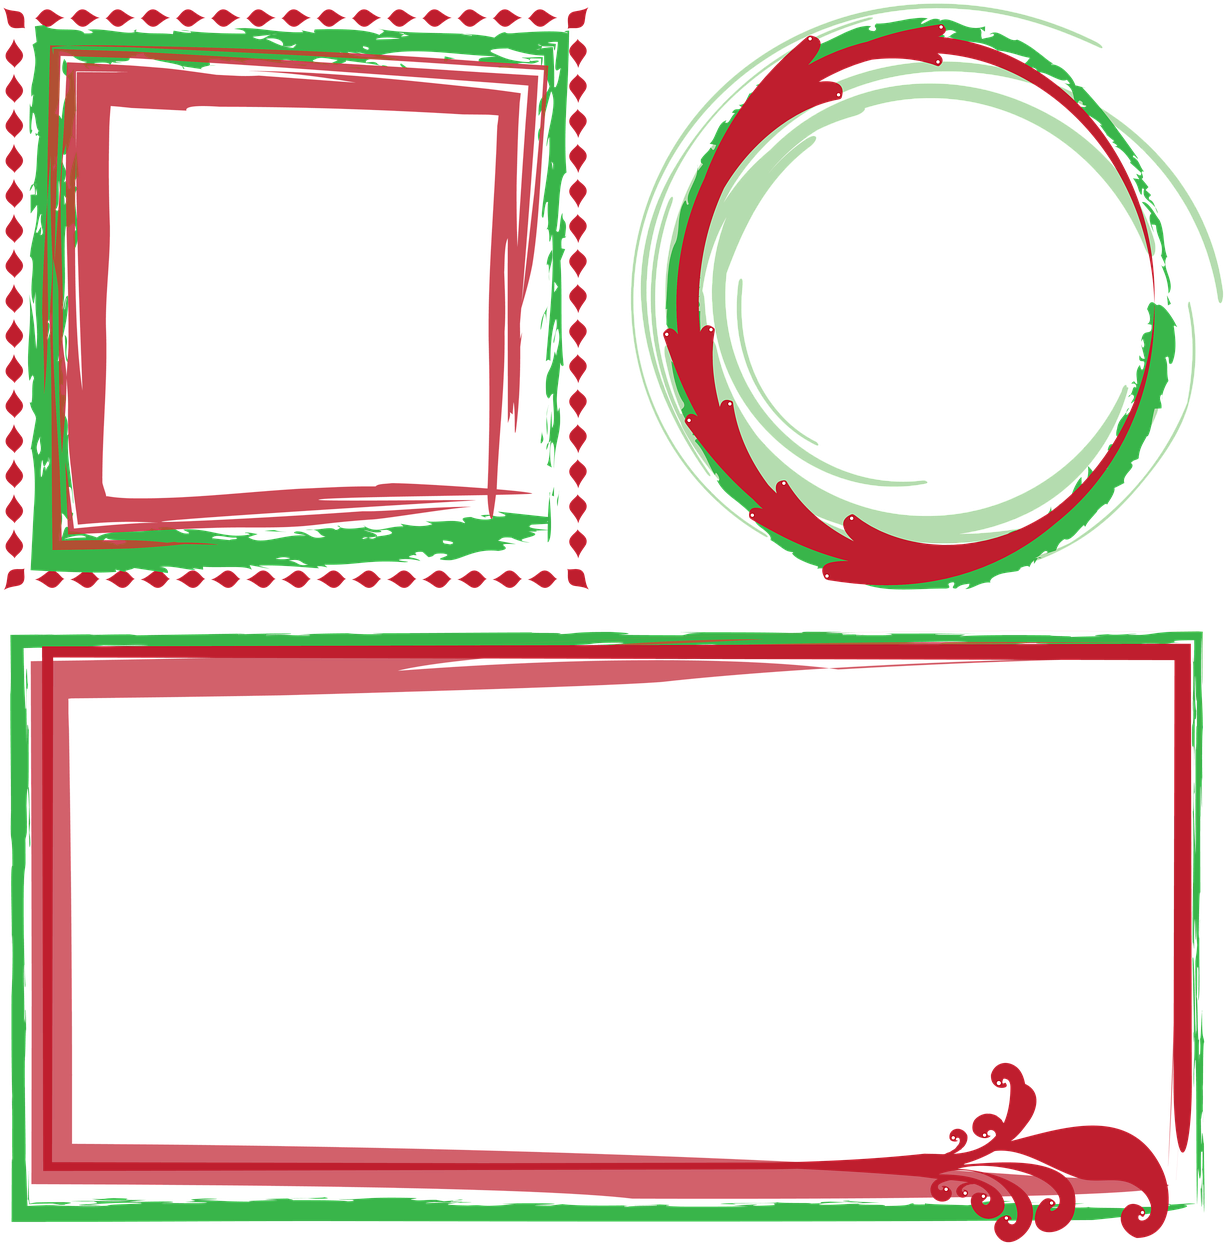 A Set Of Frames With Green And Red Borders